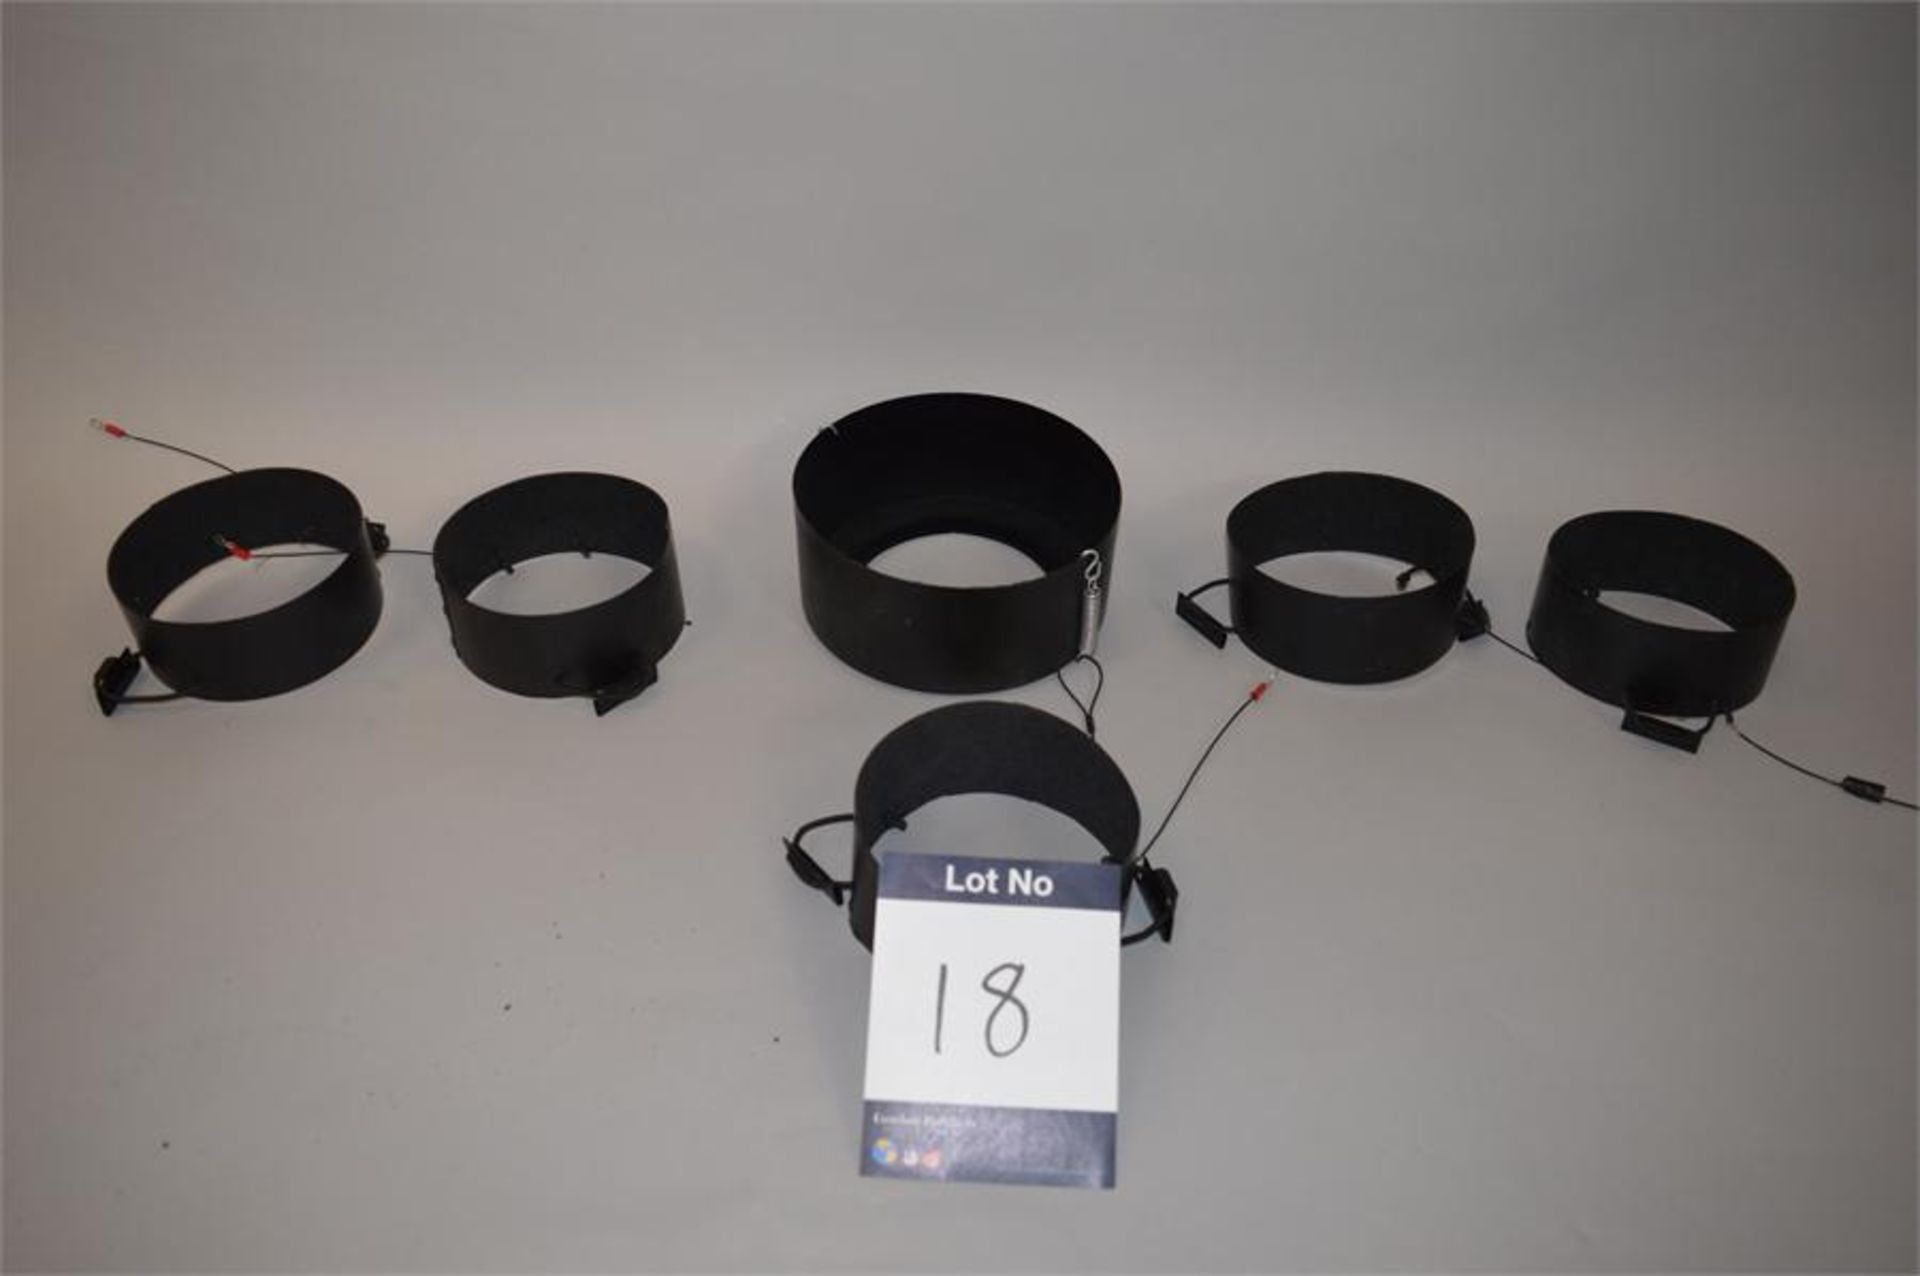 21 x Varilite, VL2000 Narrow 2" Short Top Hats and 2 x Varilite VL2000 Wide Top Hats, as lotted - Image 2 of 4